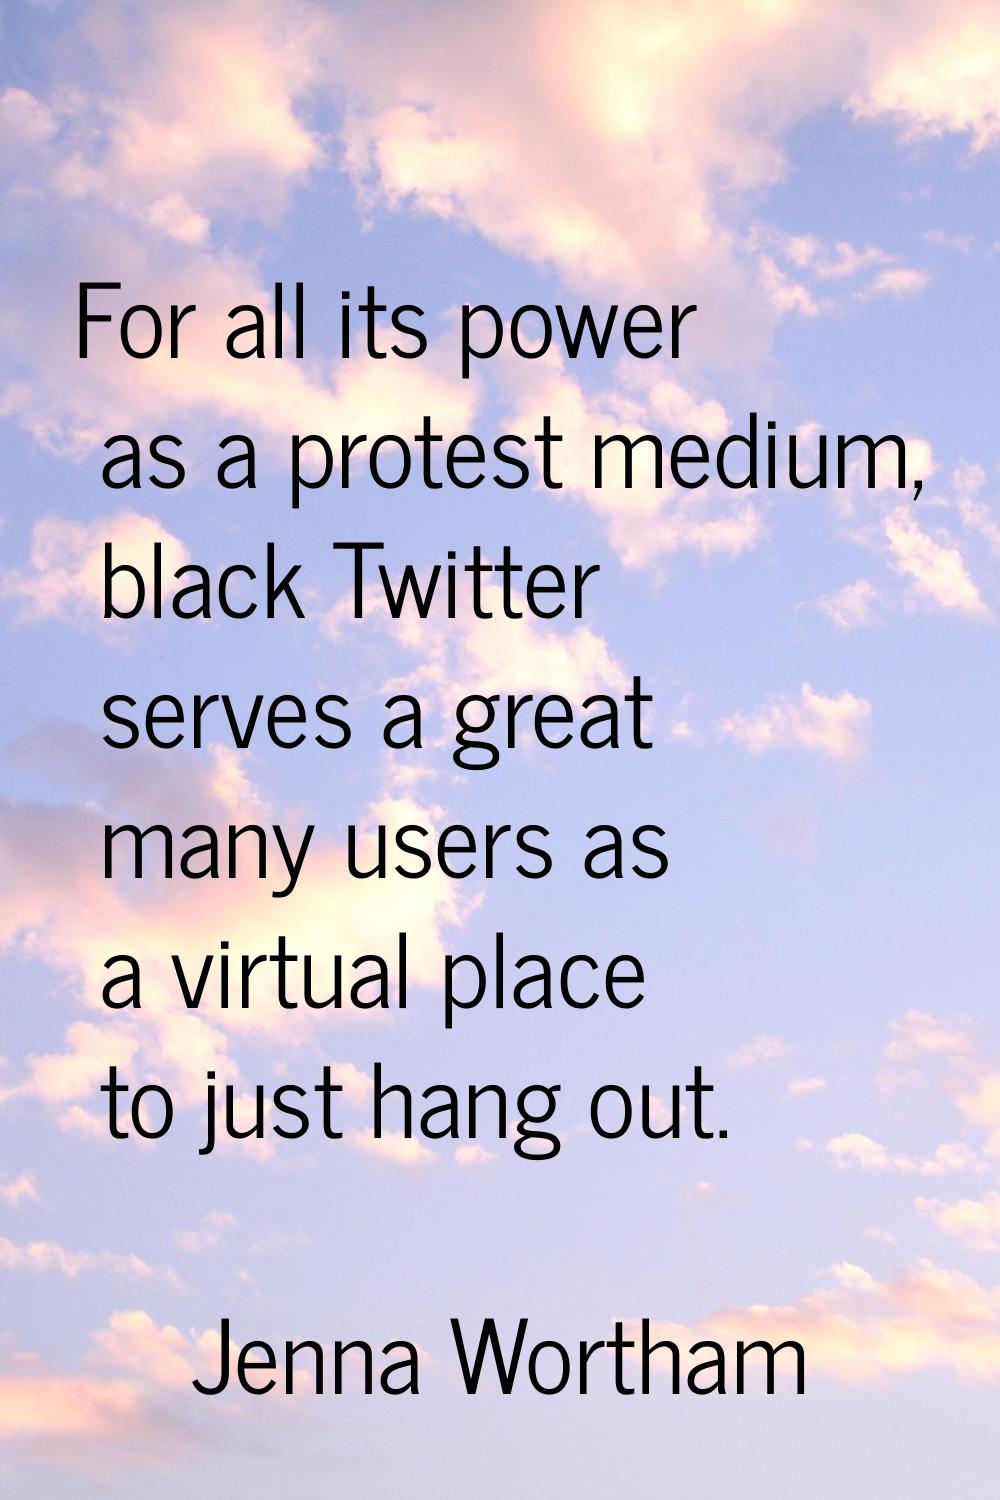 For all its power as a protest medium, black Twitter serves a great many users as a virtual place t